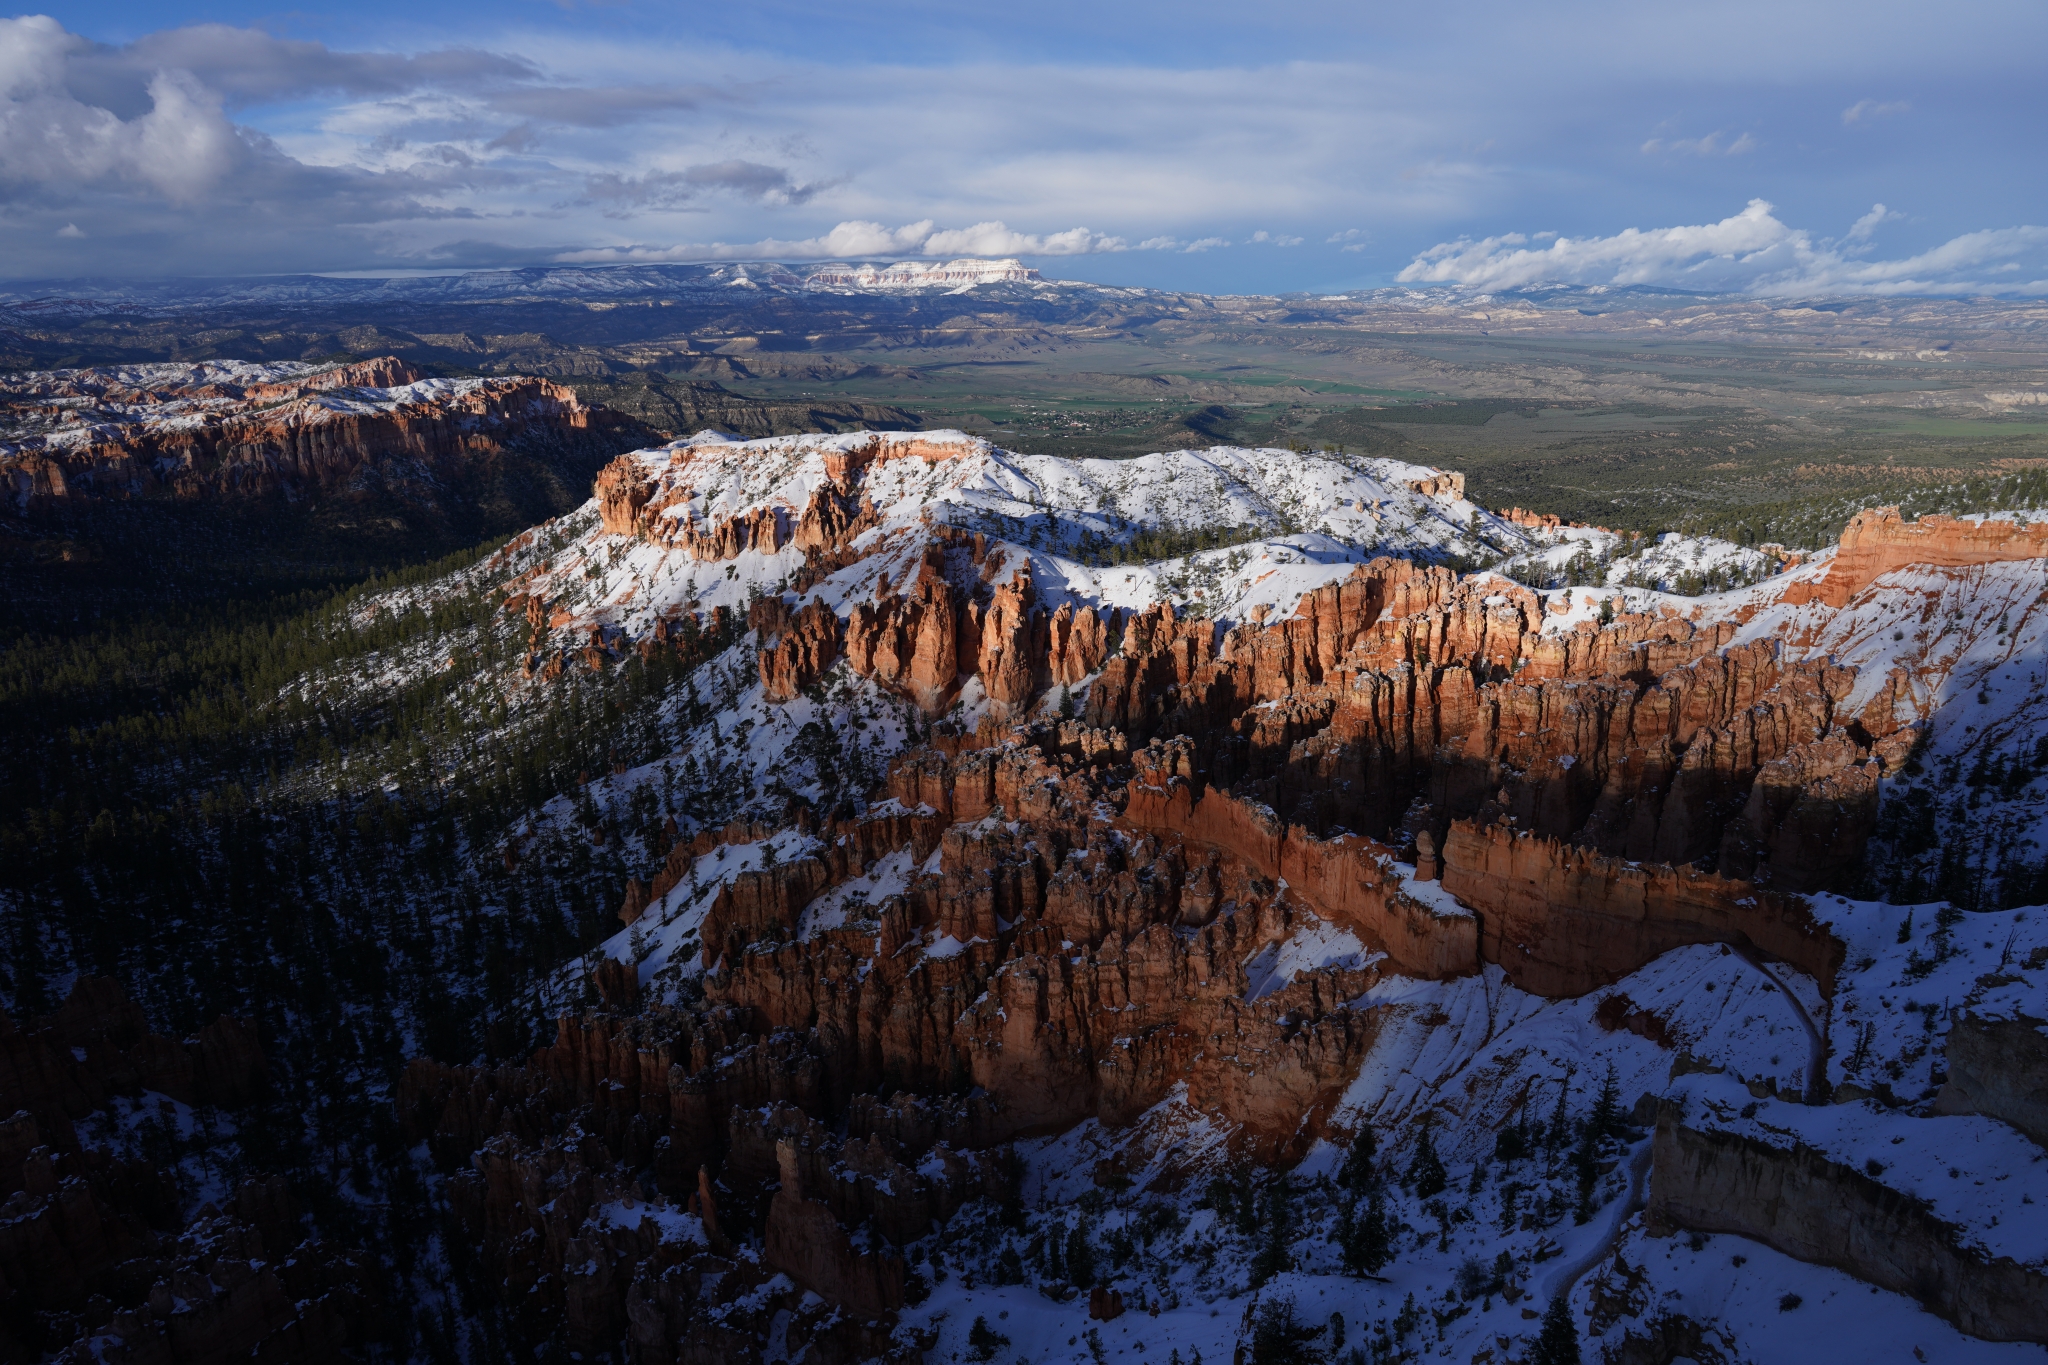 Landscape of red rocky cliffs dusted with snow